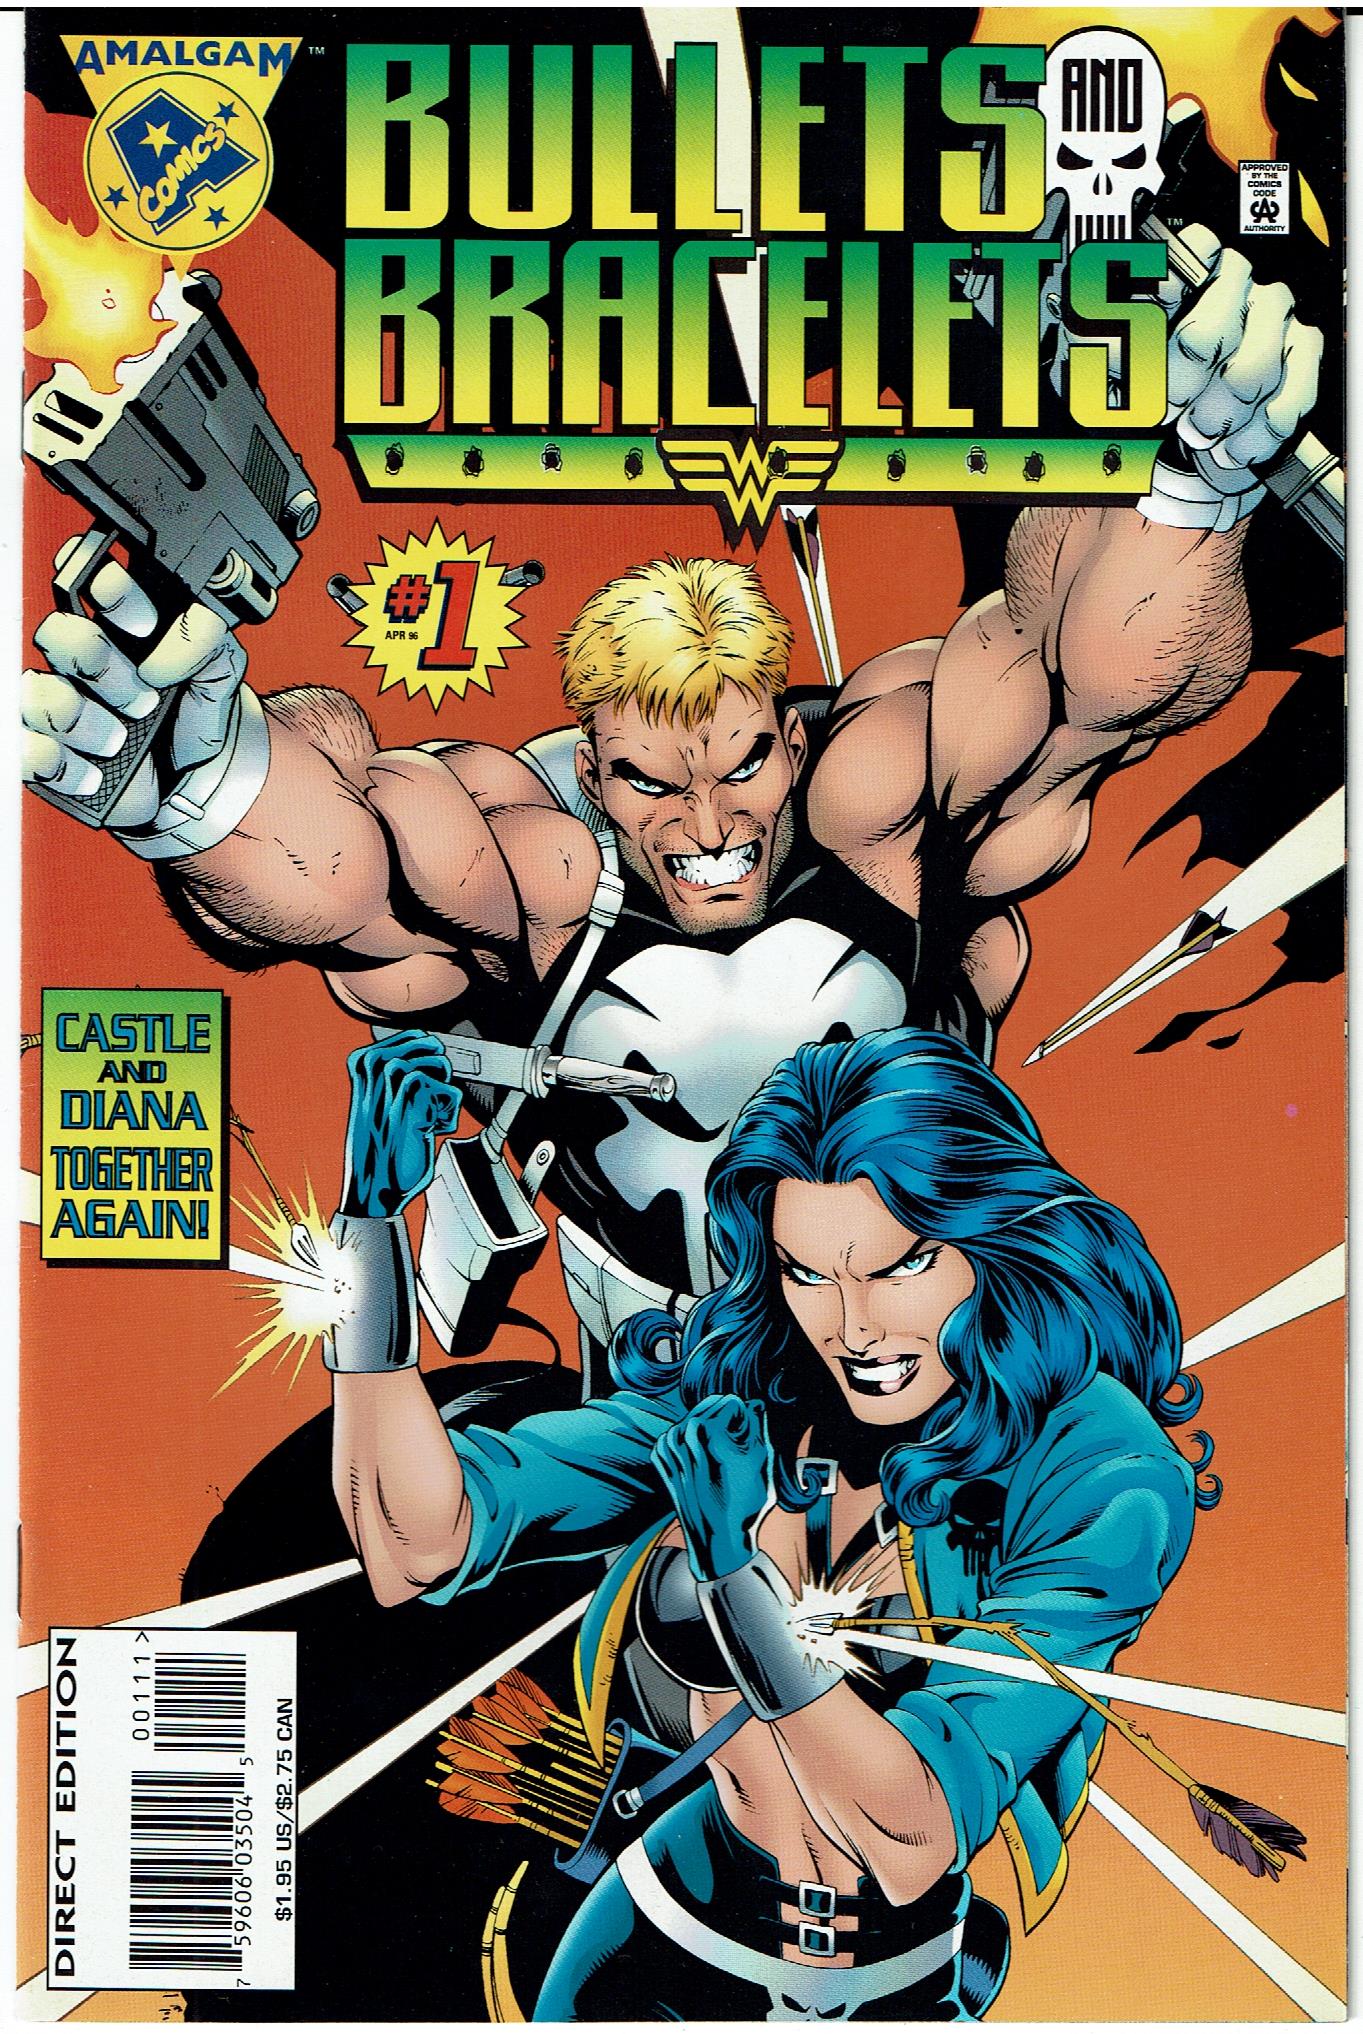 bullets and bracelets 1 amalgam 1996 - Buy Antique comics from the U.S. on  todocoleccion